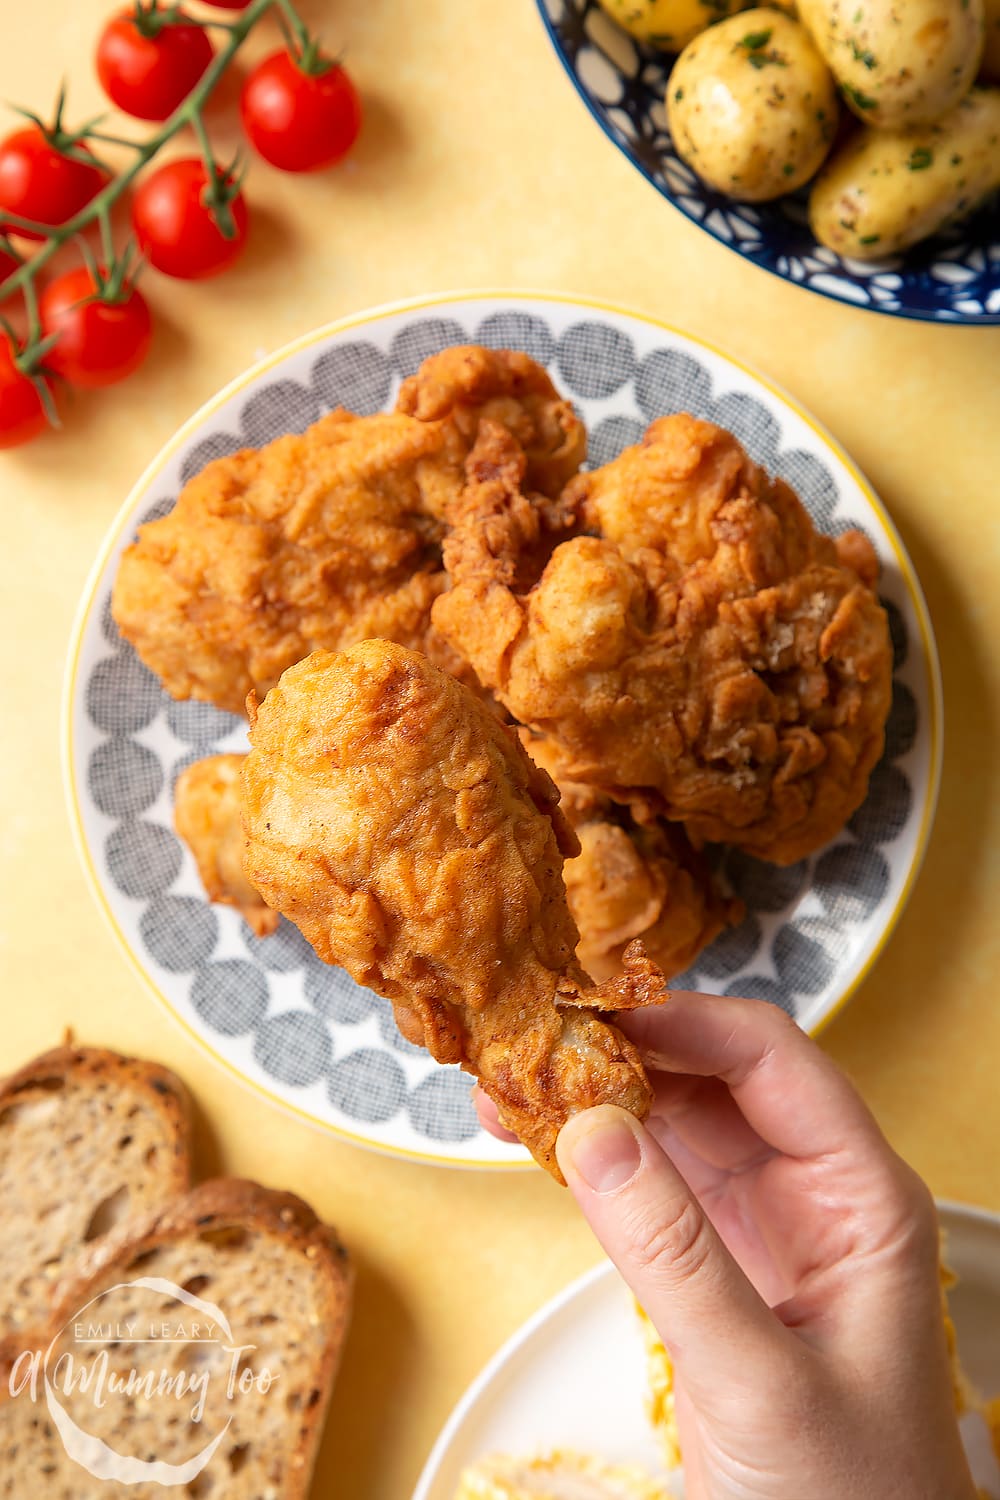 Gordon Ramsay’s buttermilk fried chicken arranged on a plate, surrounded by tomatoes, potatoes, bread and corn on the cob. A hand holds a well-coated drumstick.